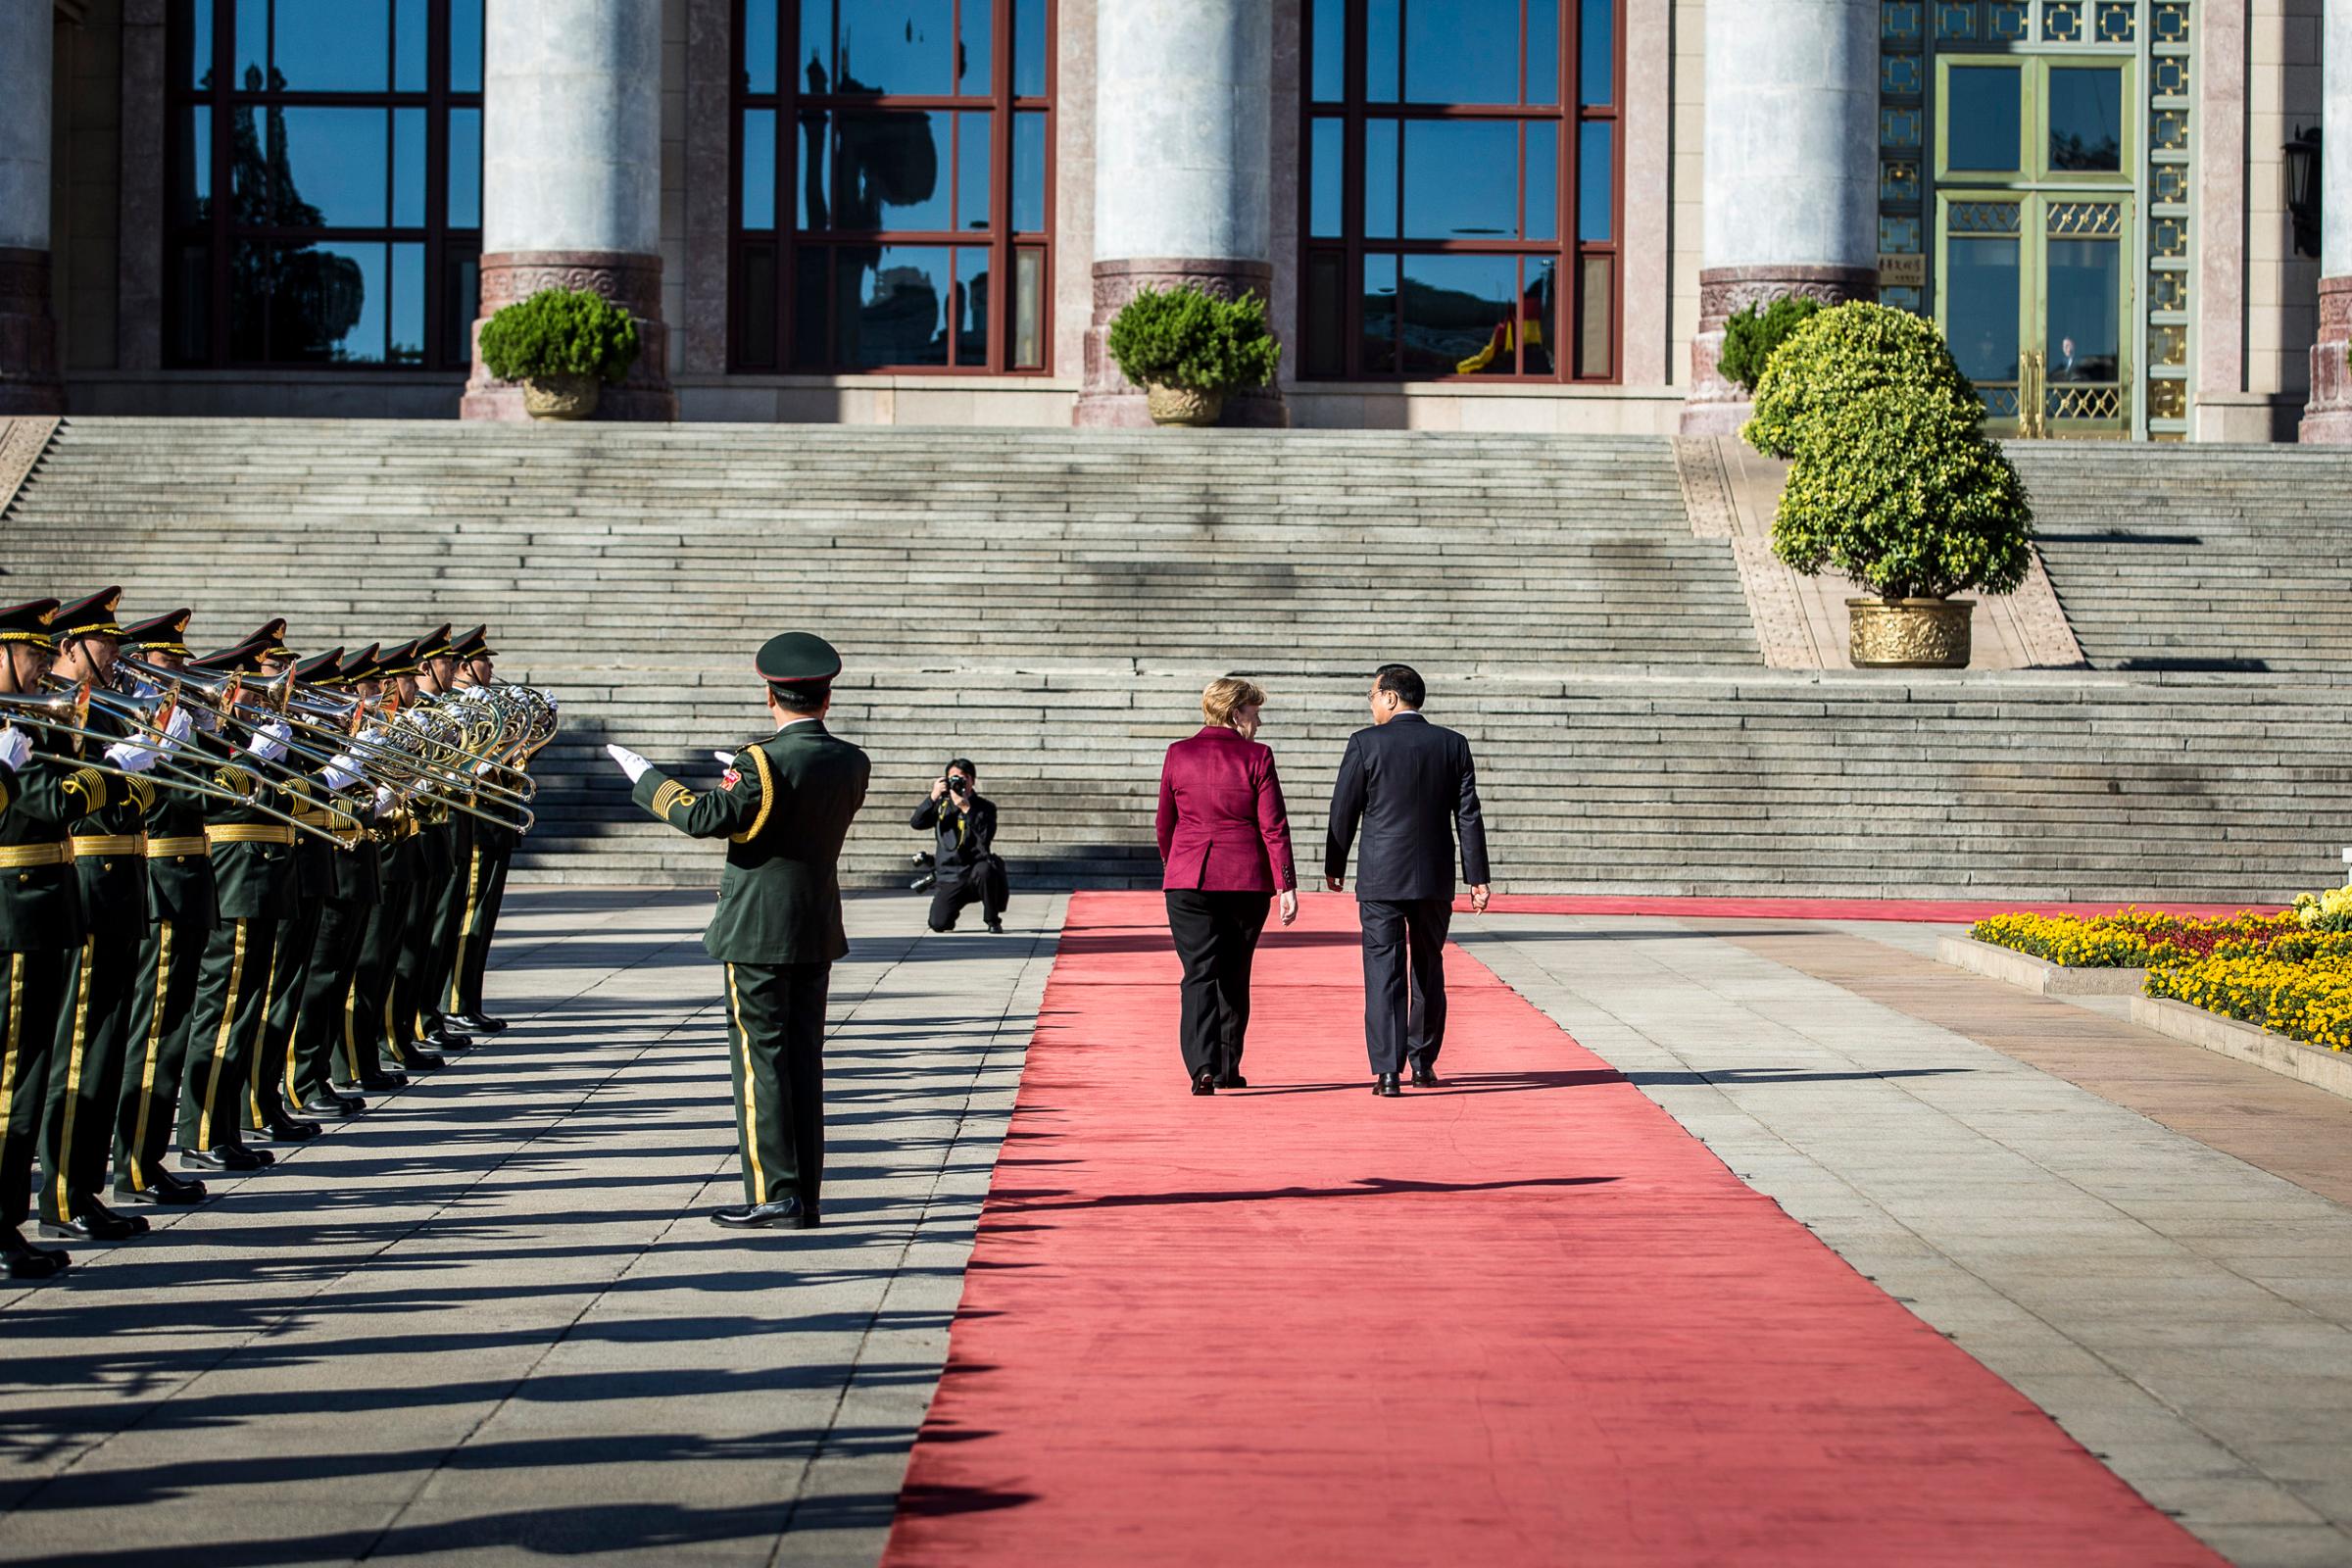 Chinese Premiere Li Keqiang receives Chancellor Angela Merkel with Military Honors in front of Great Hall of the People in Bejing, China. Oct. 29, 2015.